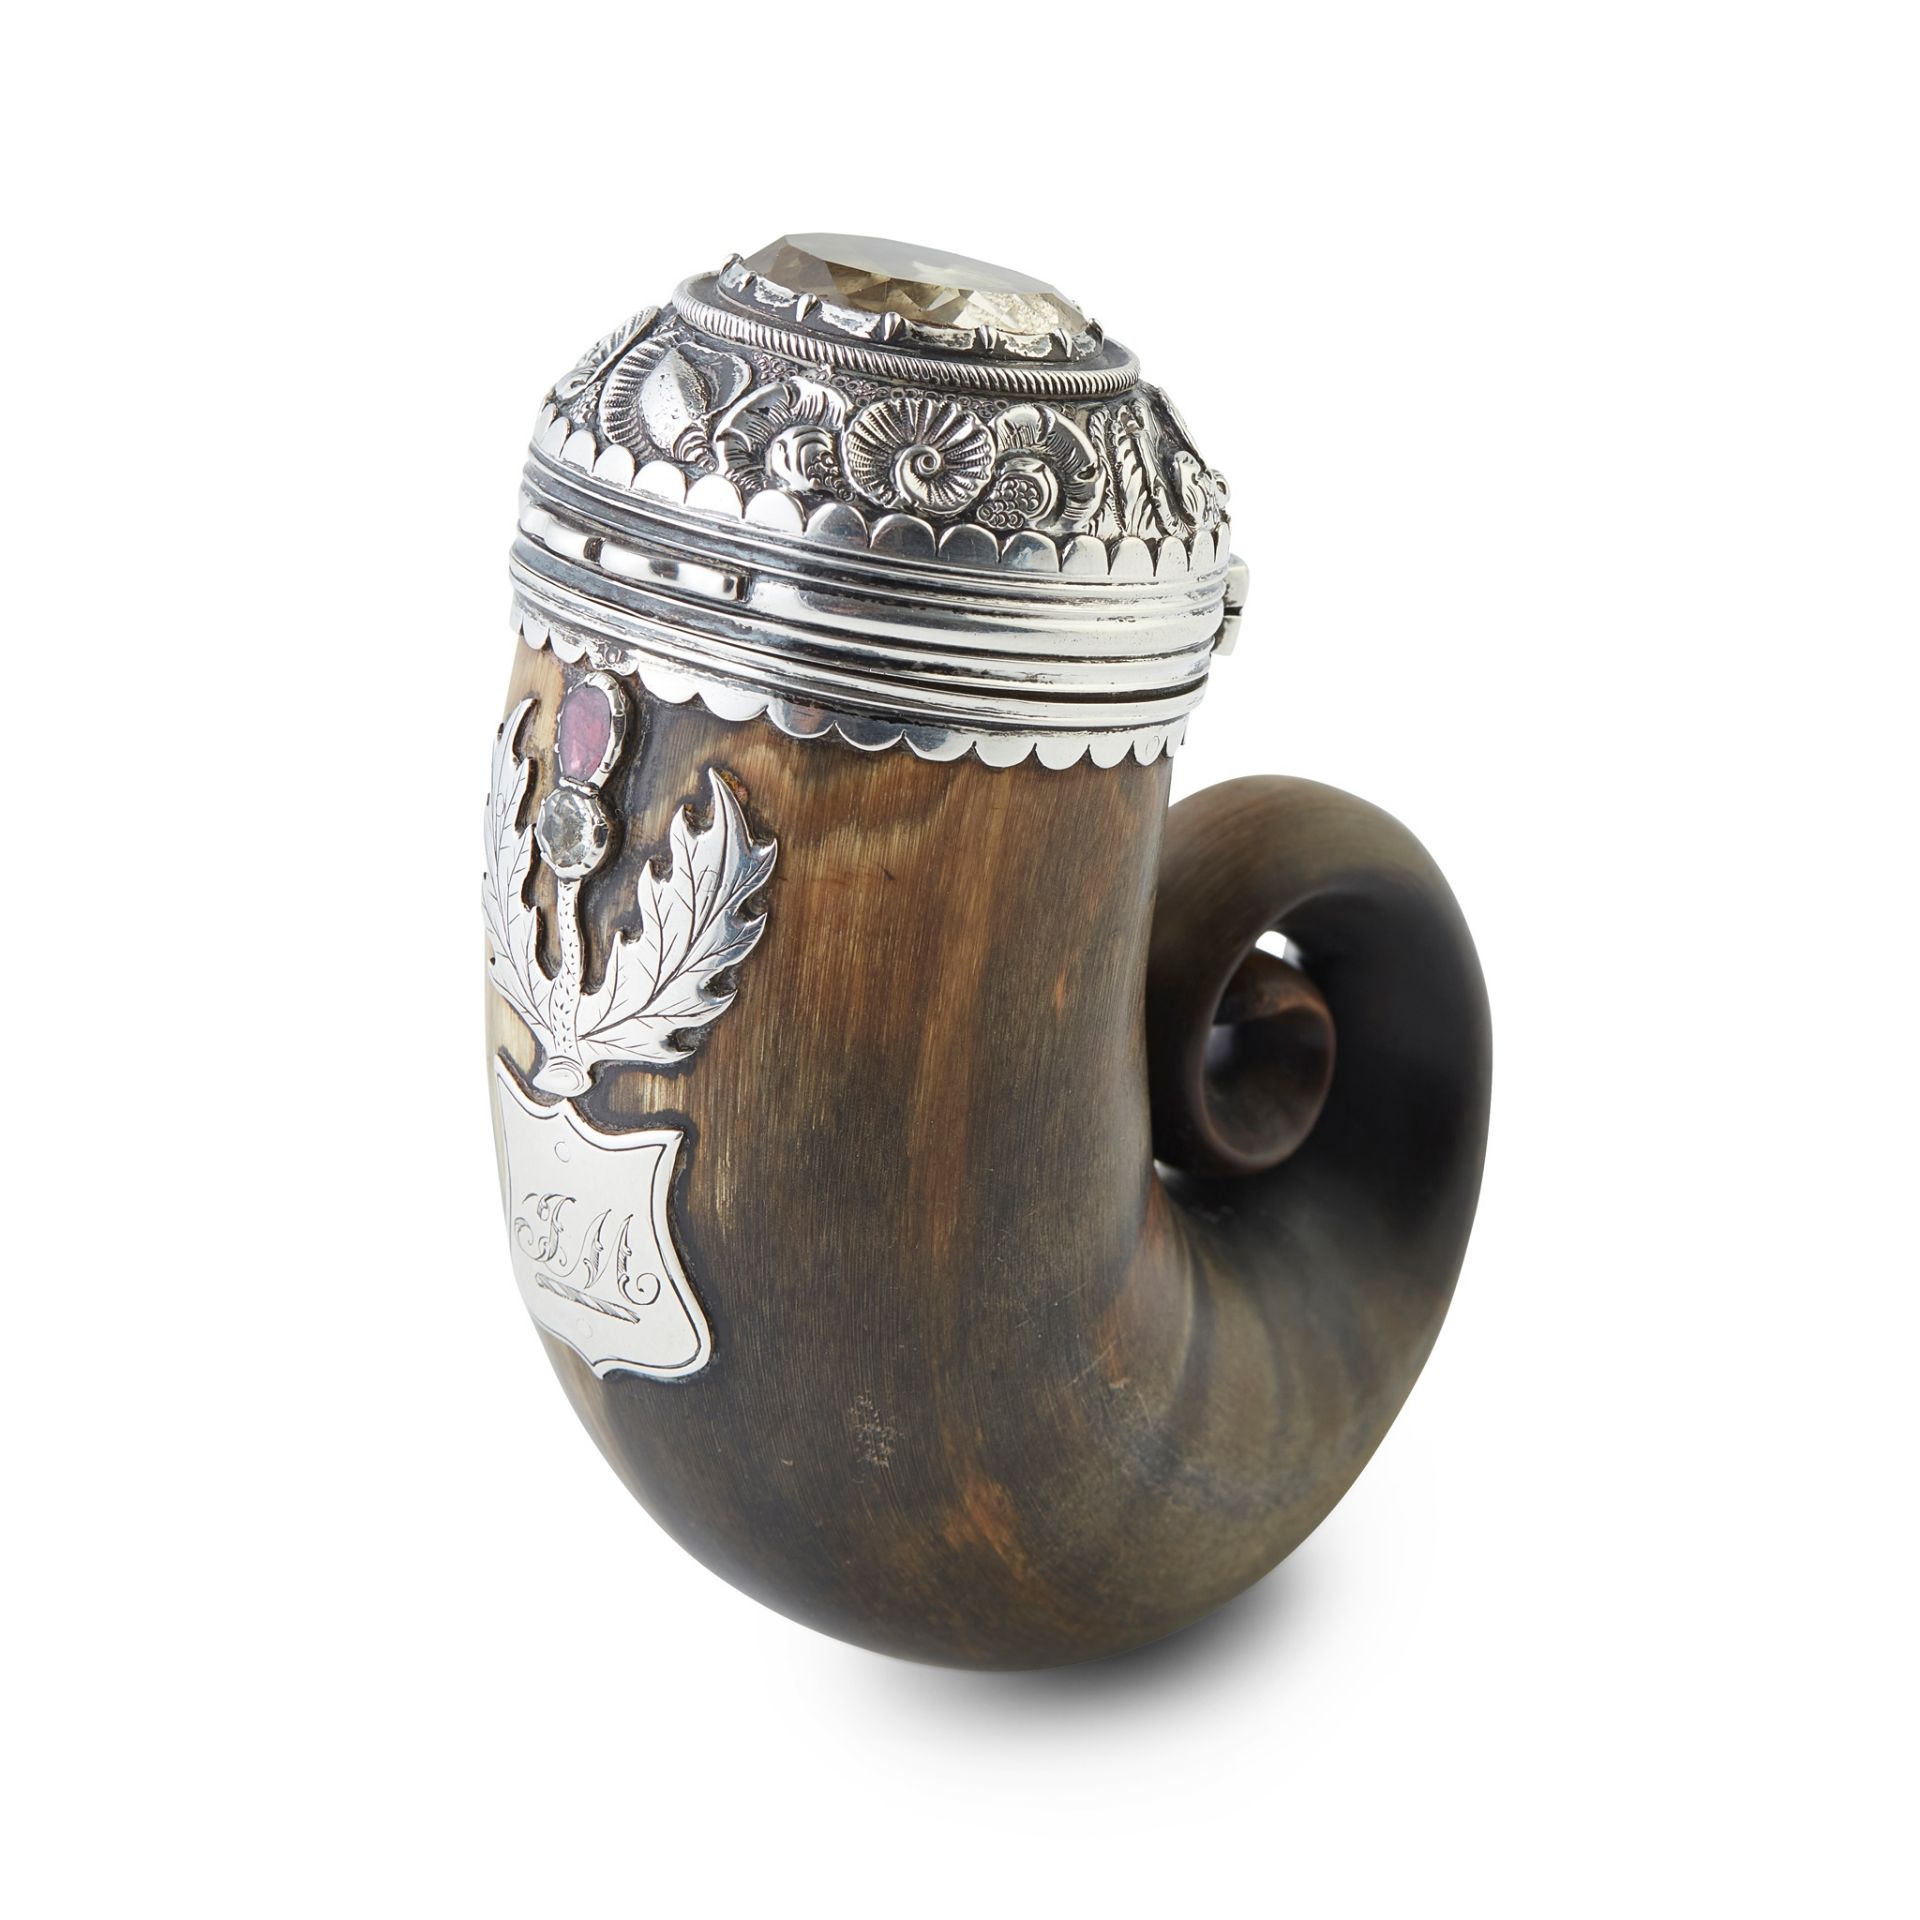 A CURLY HORN SNUFF MULL EARLY 19TH CENTURY